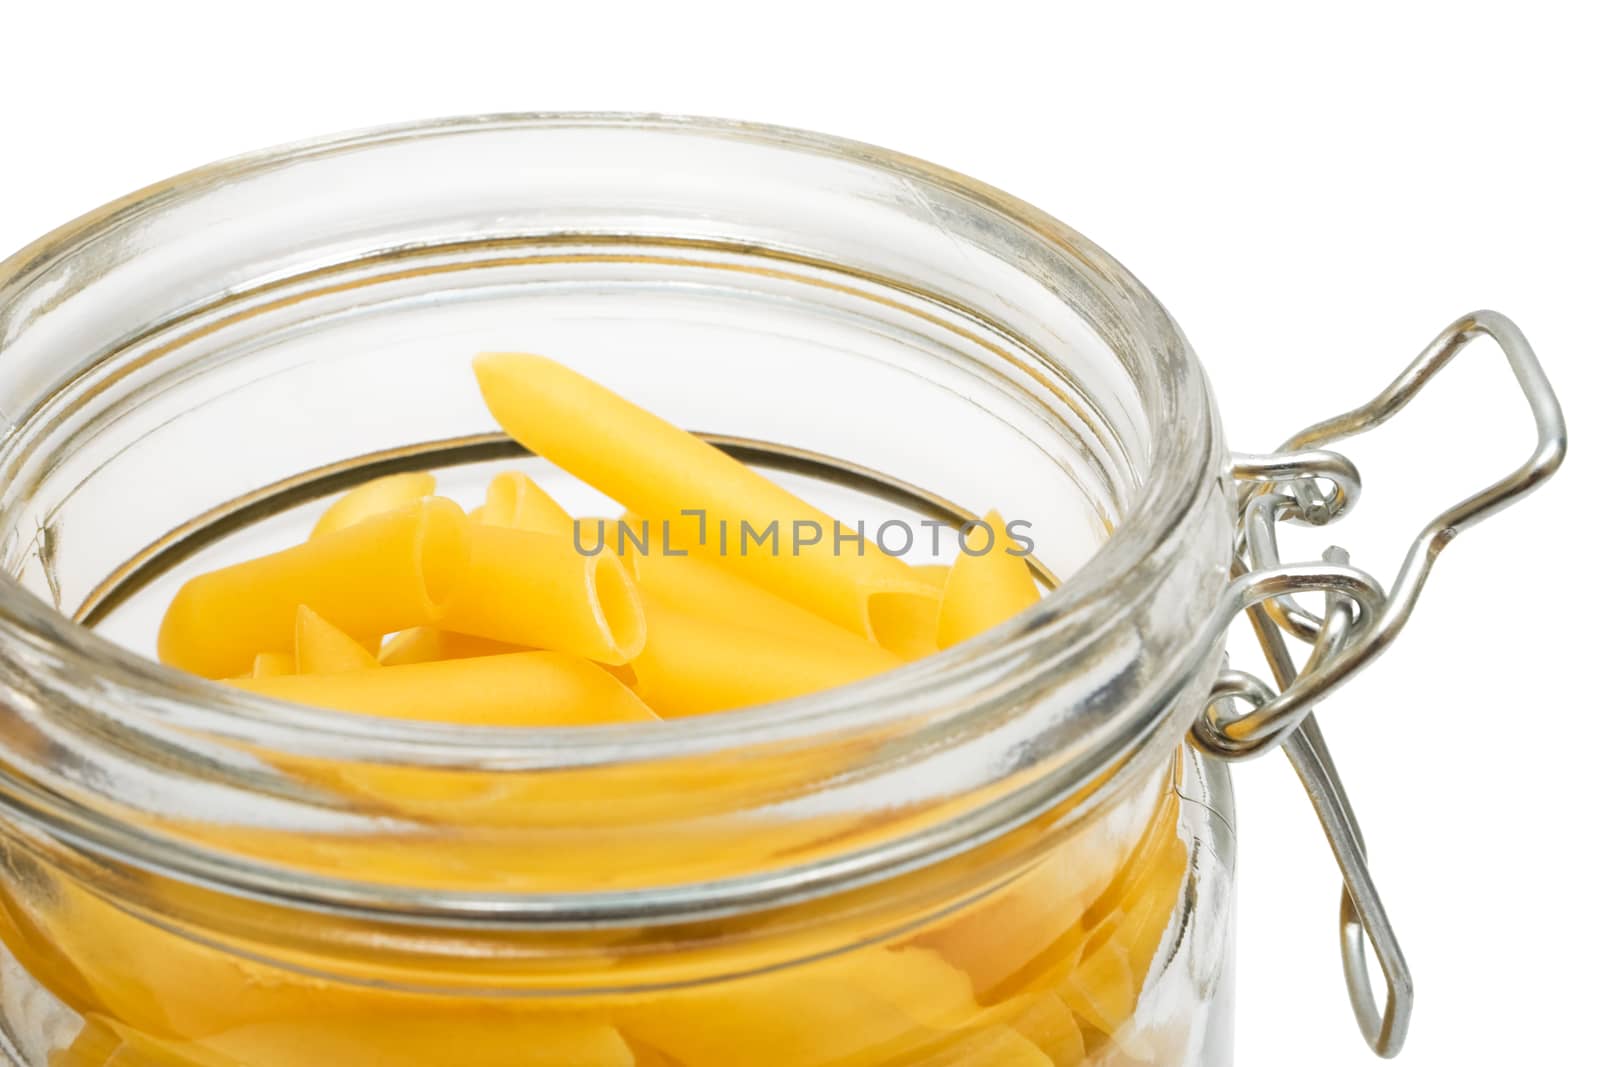 pasta in glass can on a white background